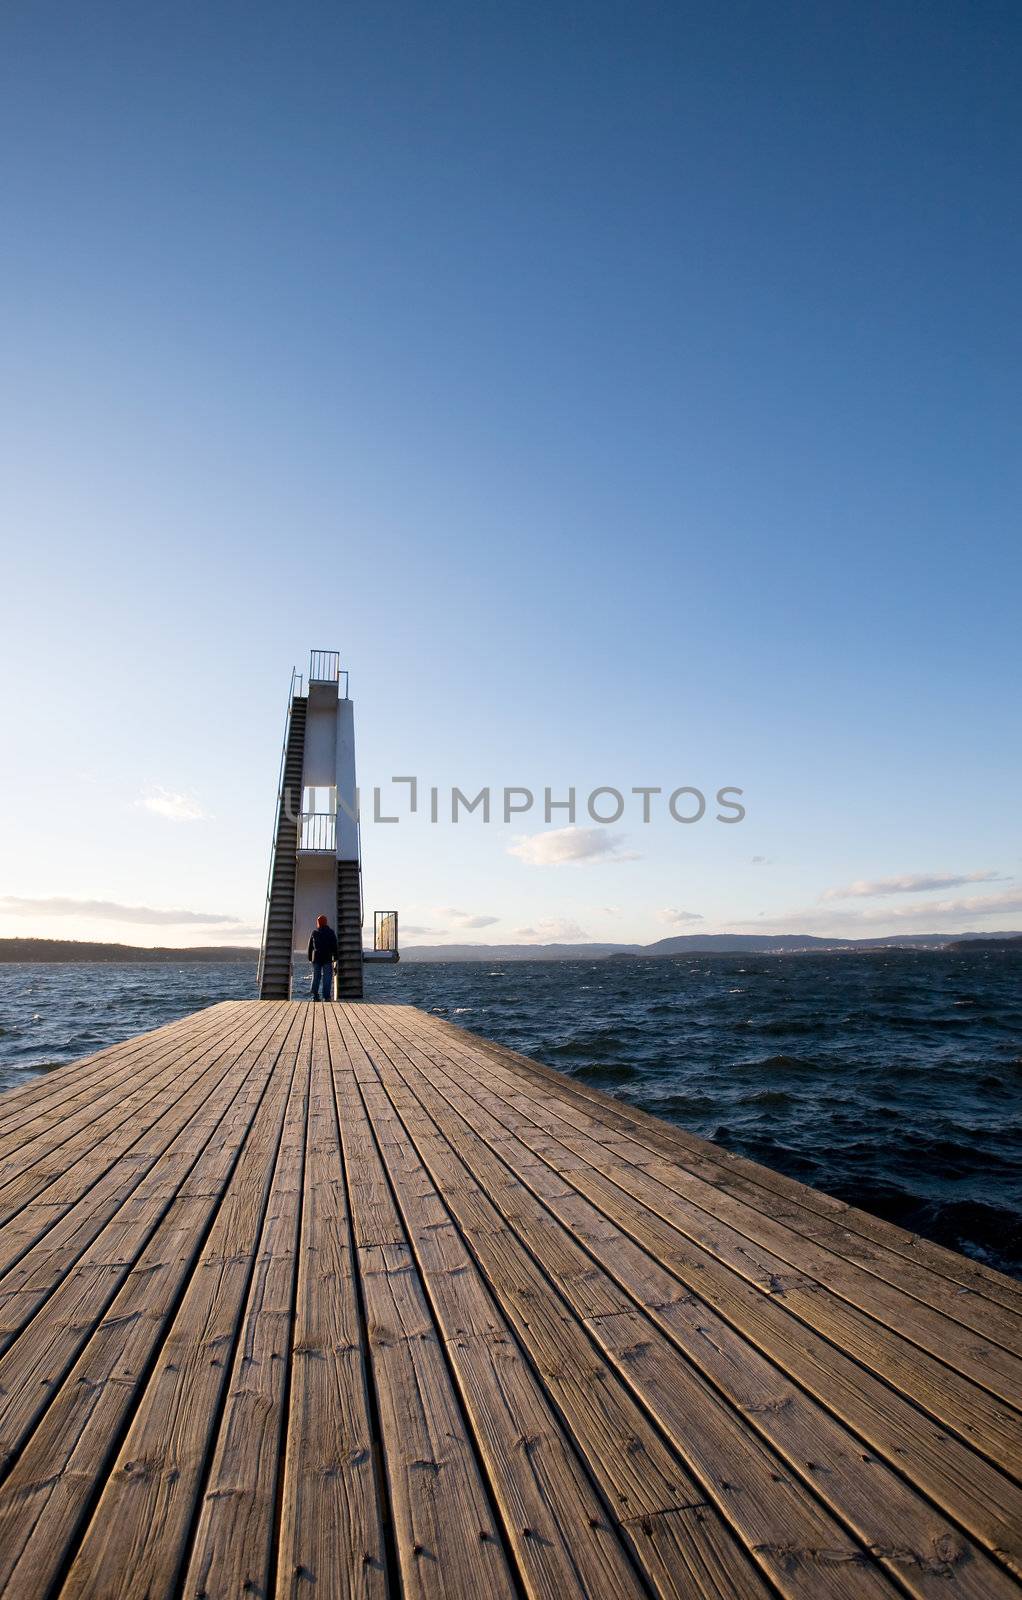 A large 10 meter dive tower into the ocean, Oslo, Norway.